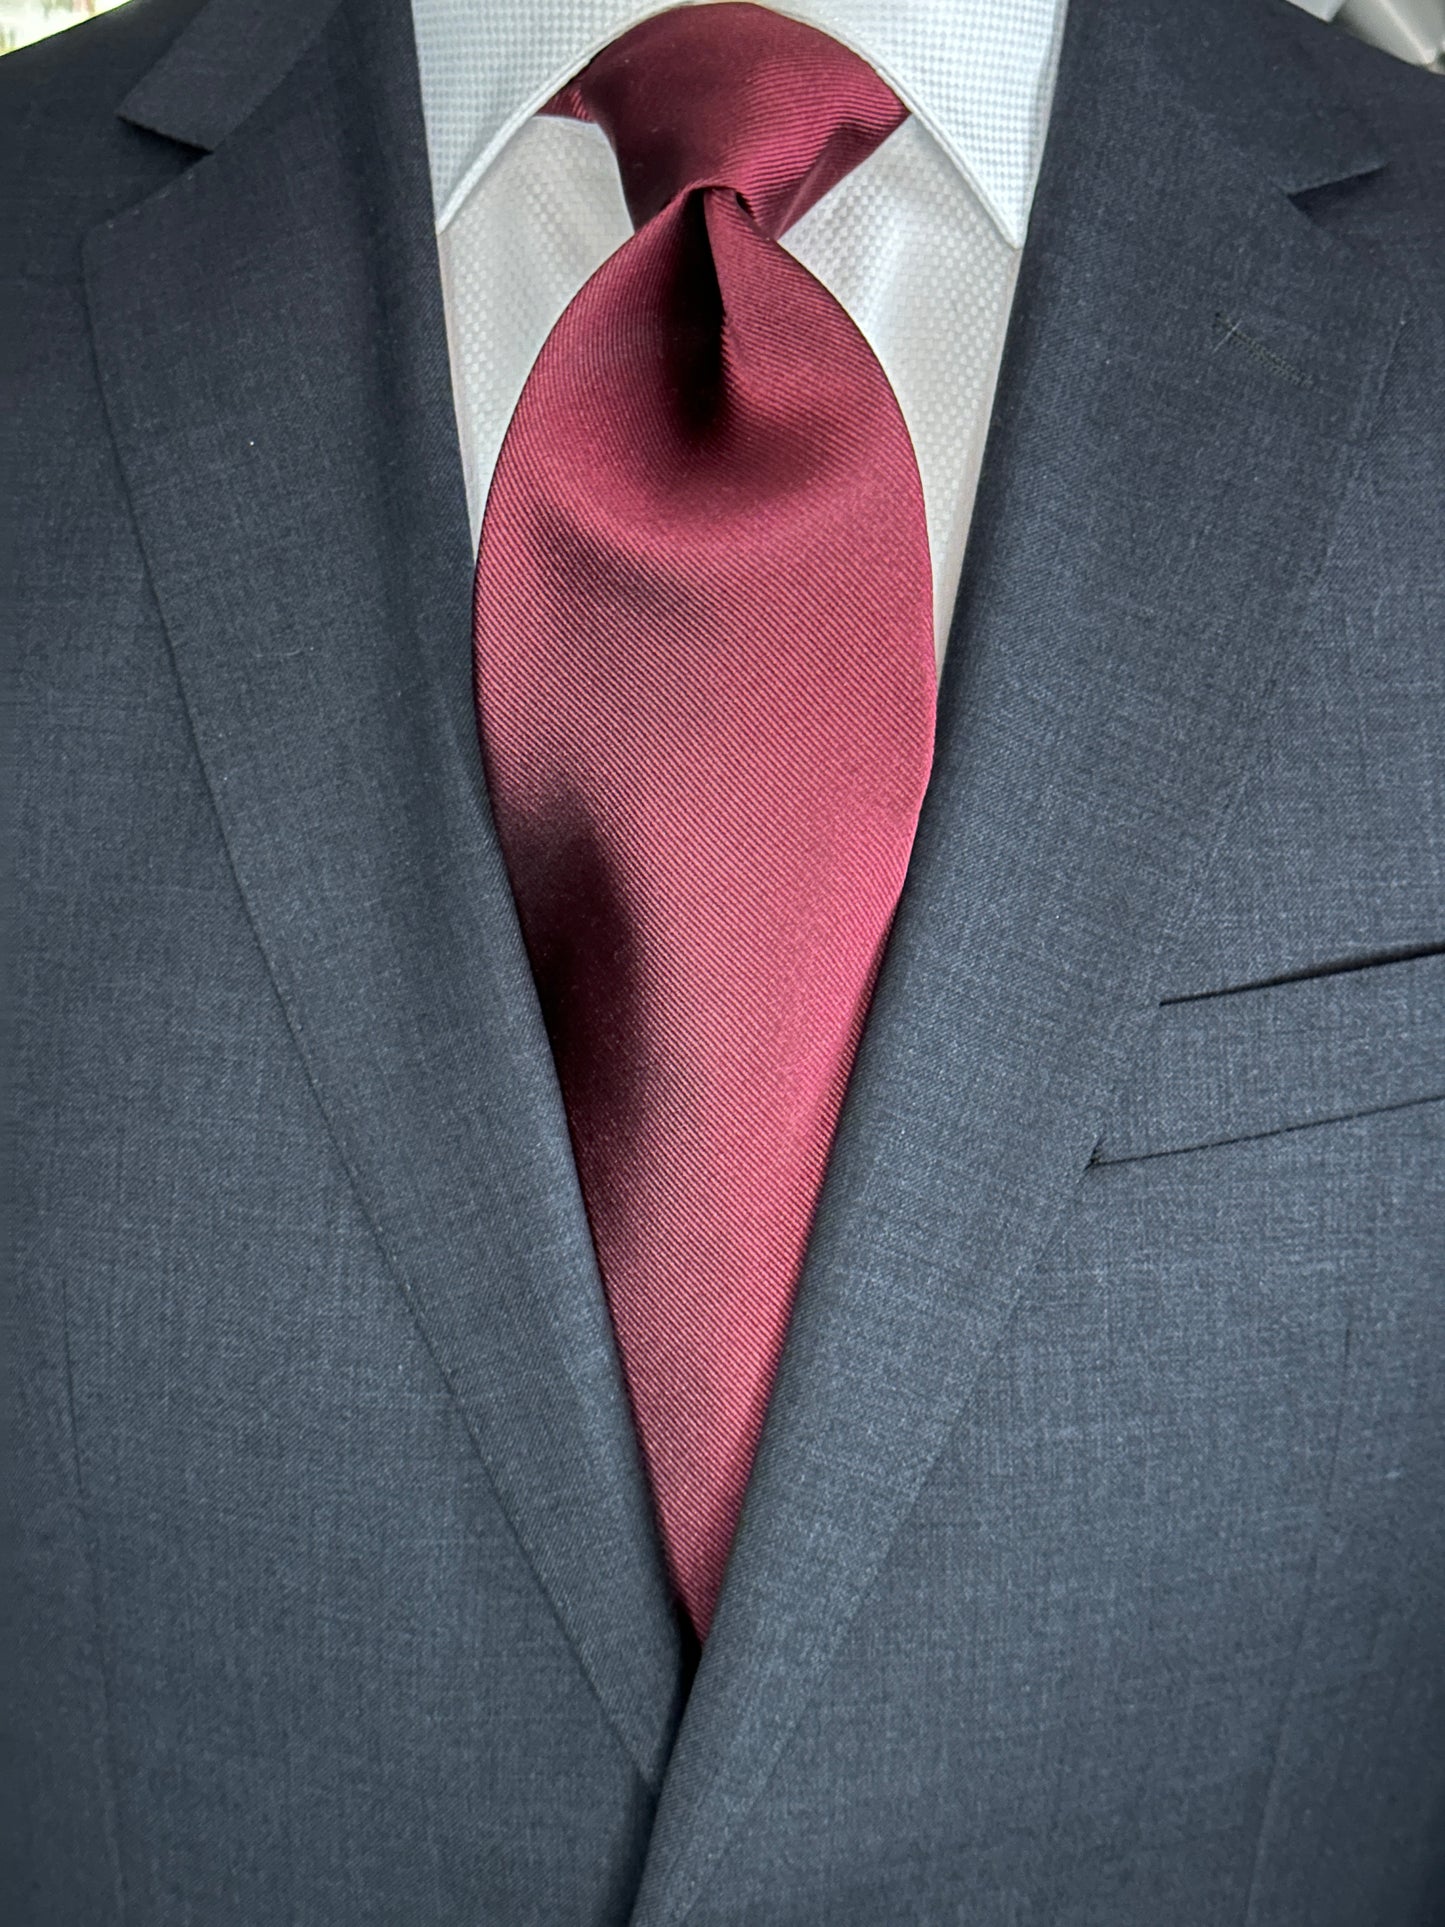 Solid ties are beautifully paired with the more busy of patters of bold stripes and heavy plaids. However, there is something so understated and elegant about a solid tie with a solid suit. Whether that be navy, charcoal or black a burgundy tie fits well with a white shirt and even a navy blazer with jeans.